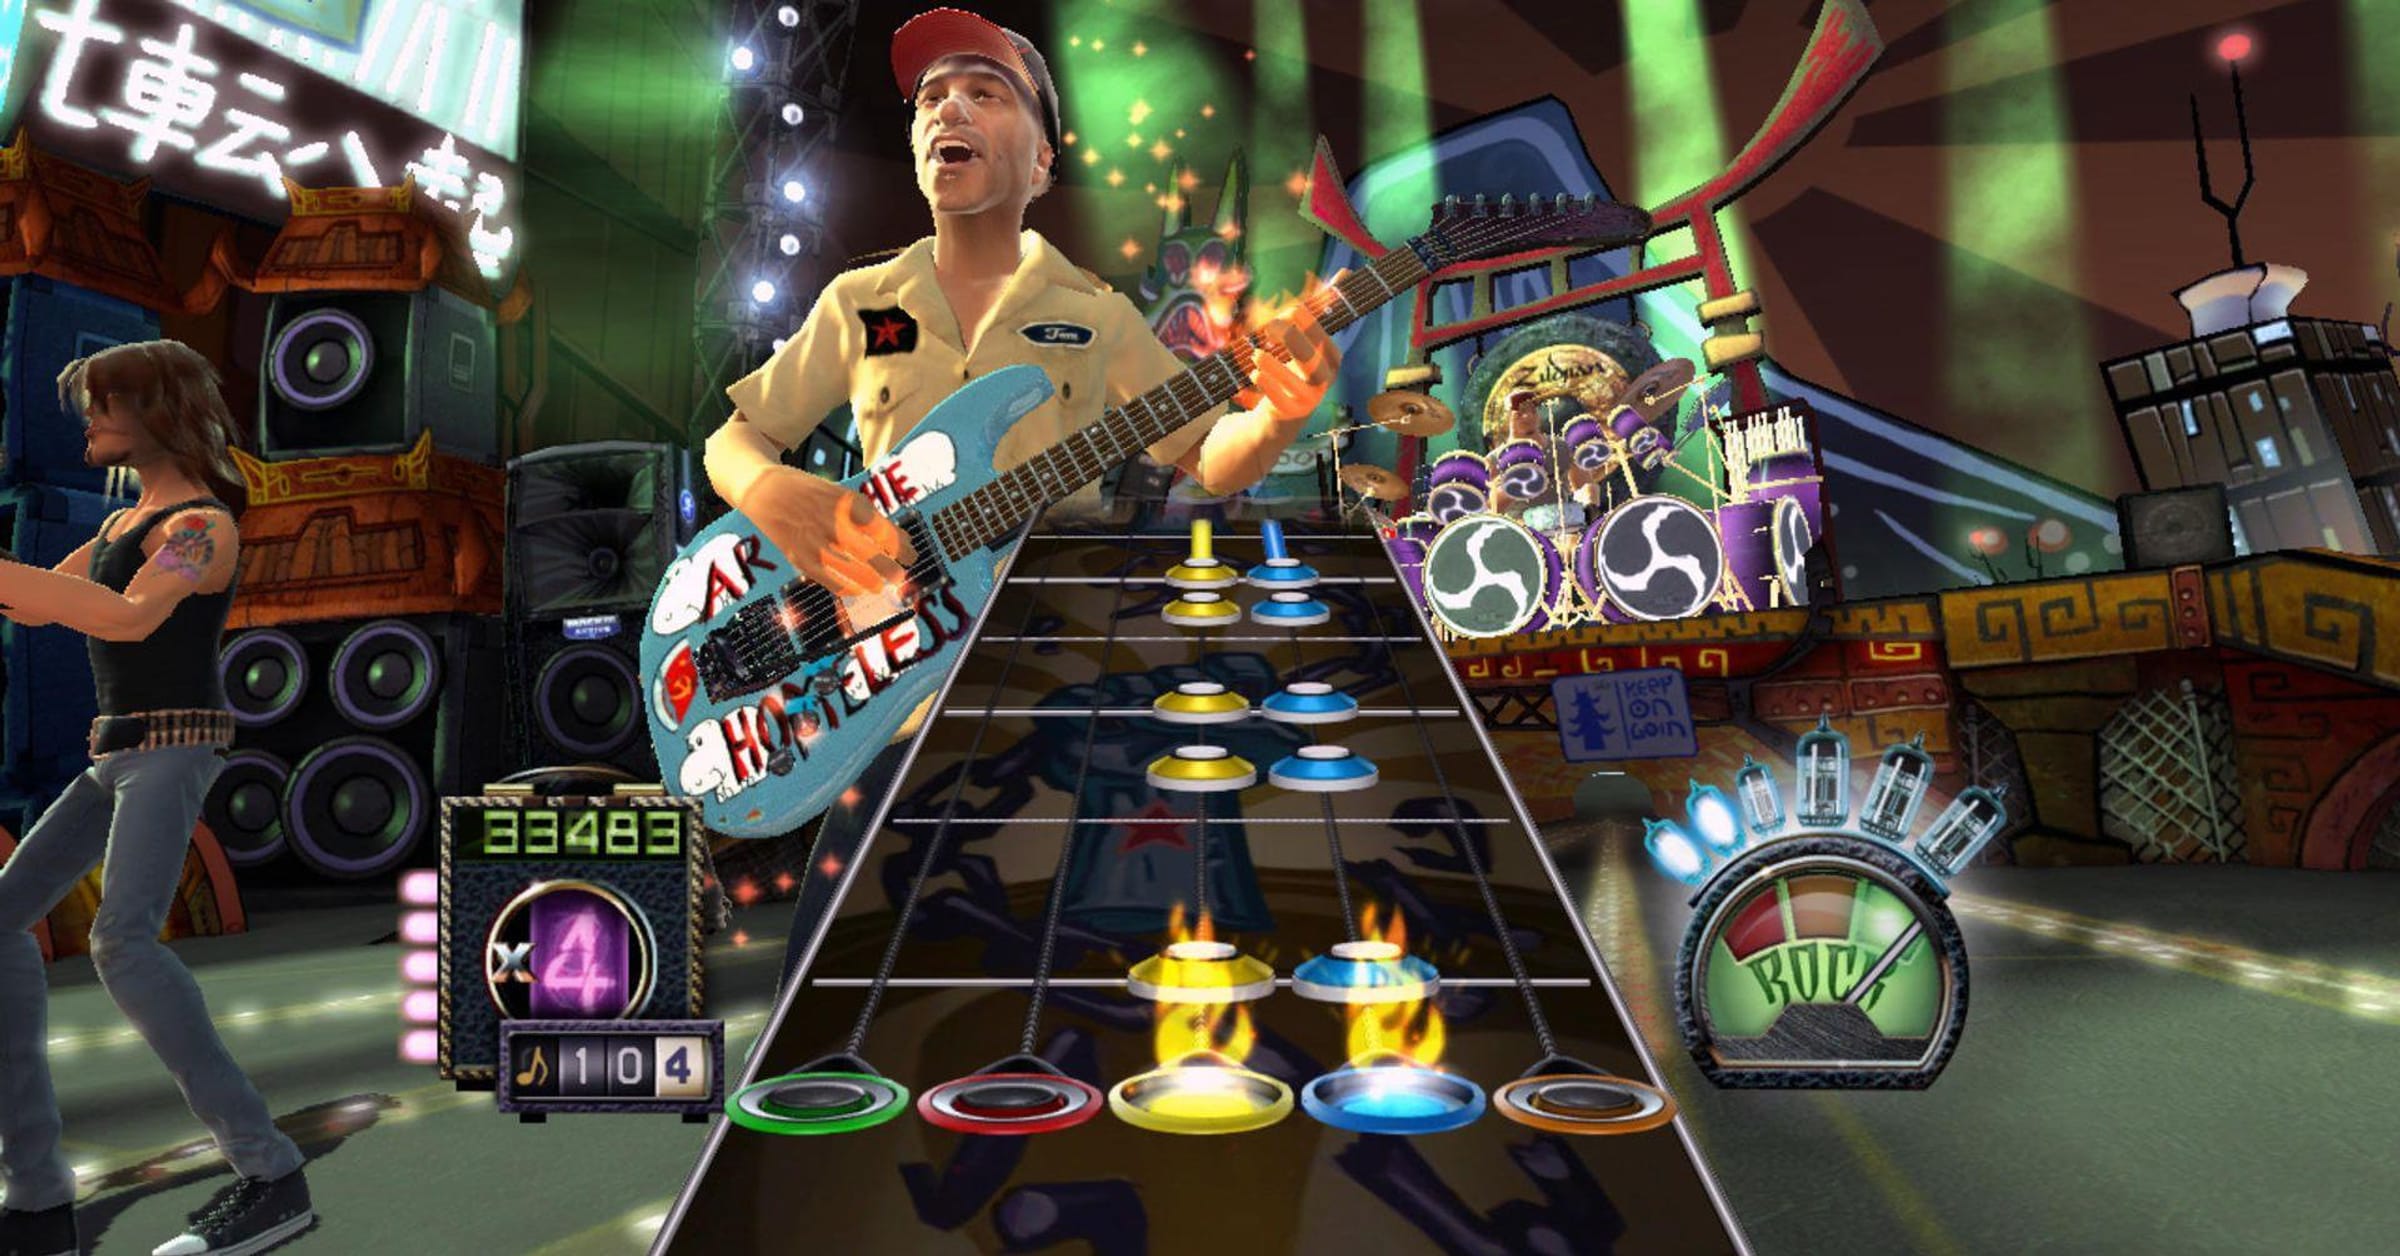 6 Best Guitar Hero Games Of All Time